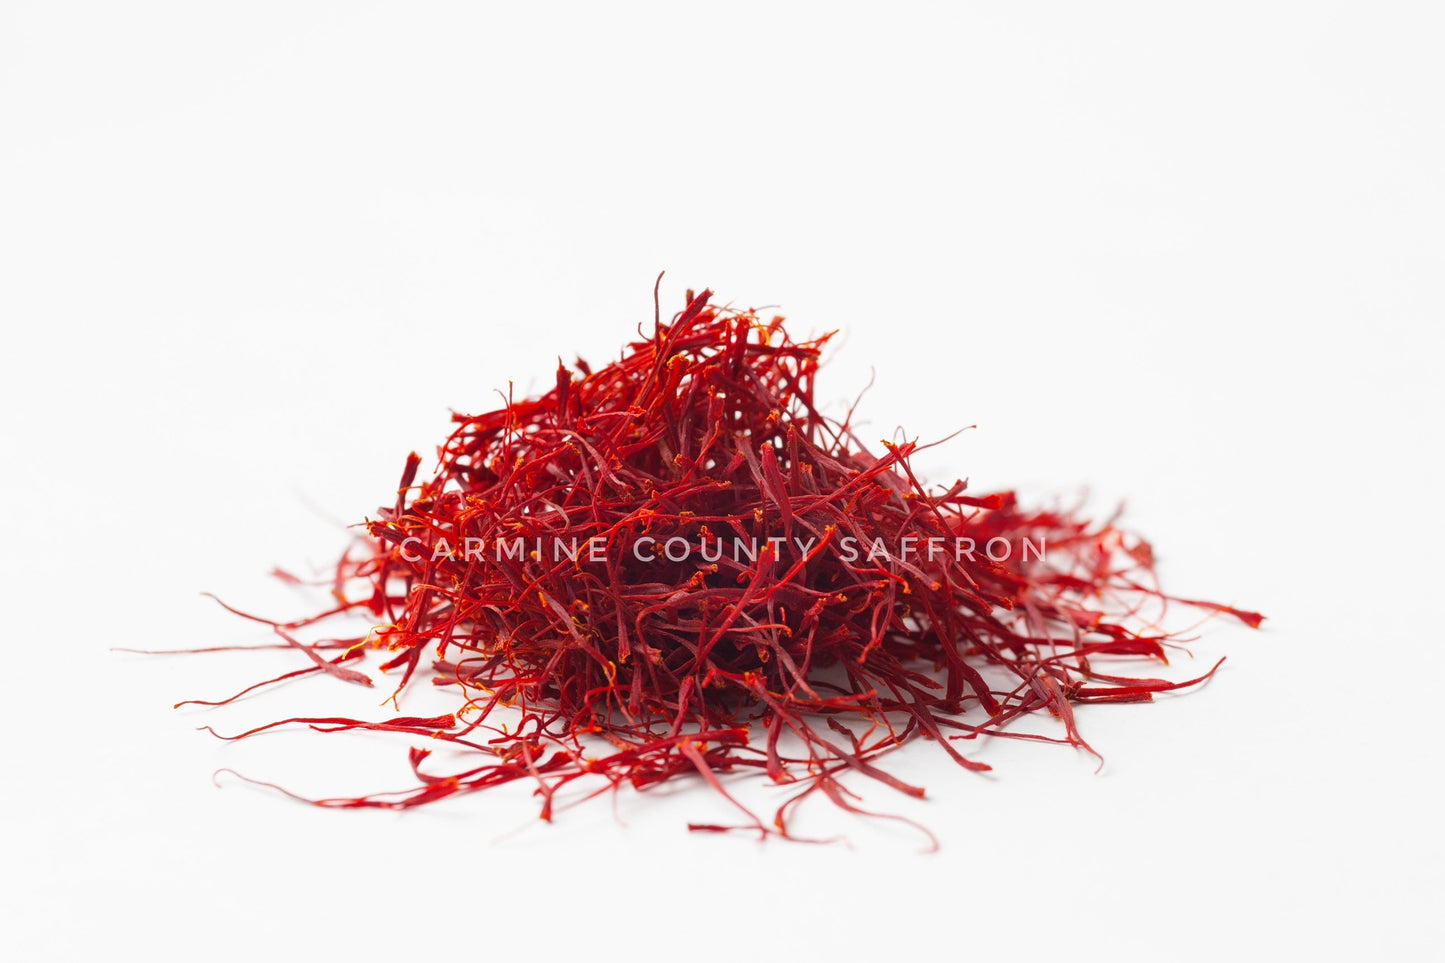 Carmine County Pure and Natural Premium Saffron Threads (Pack of 3)